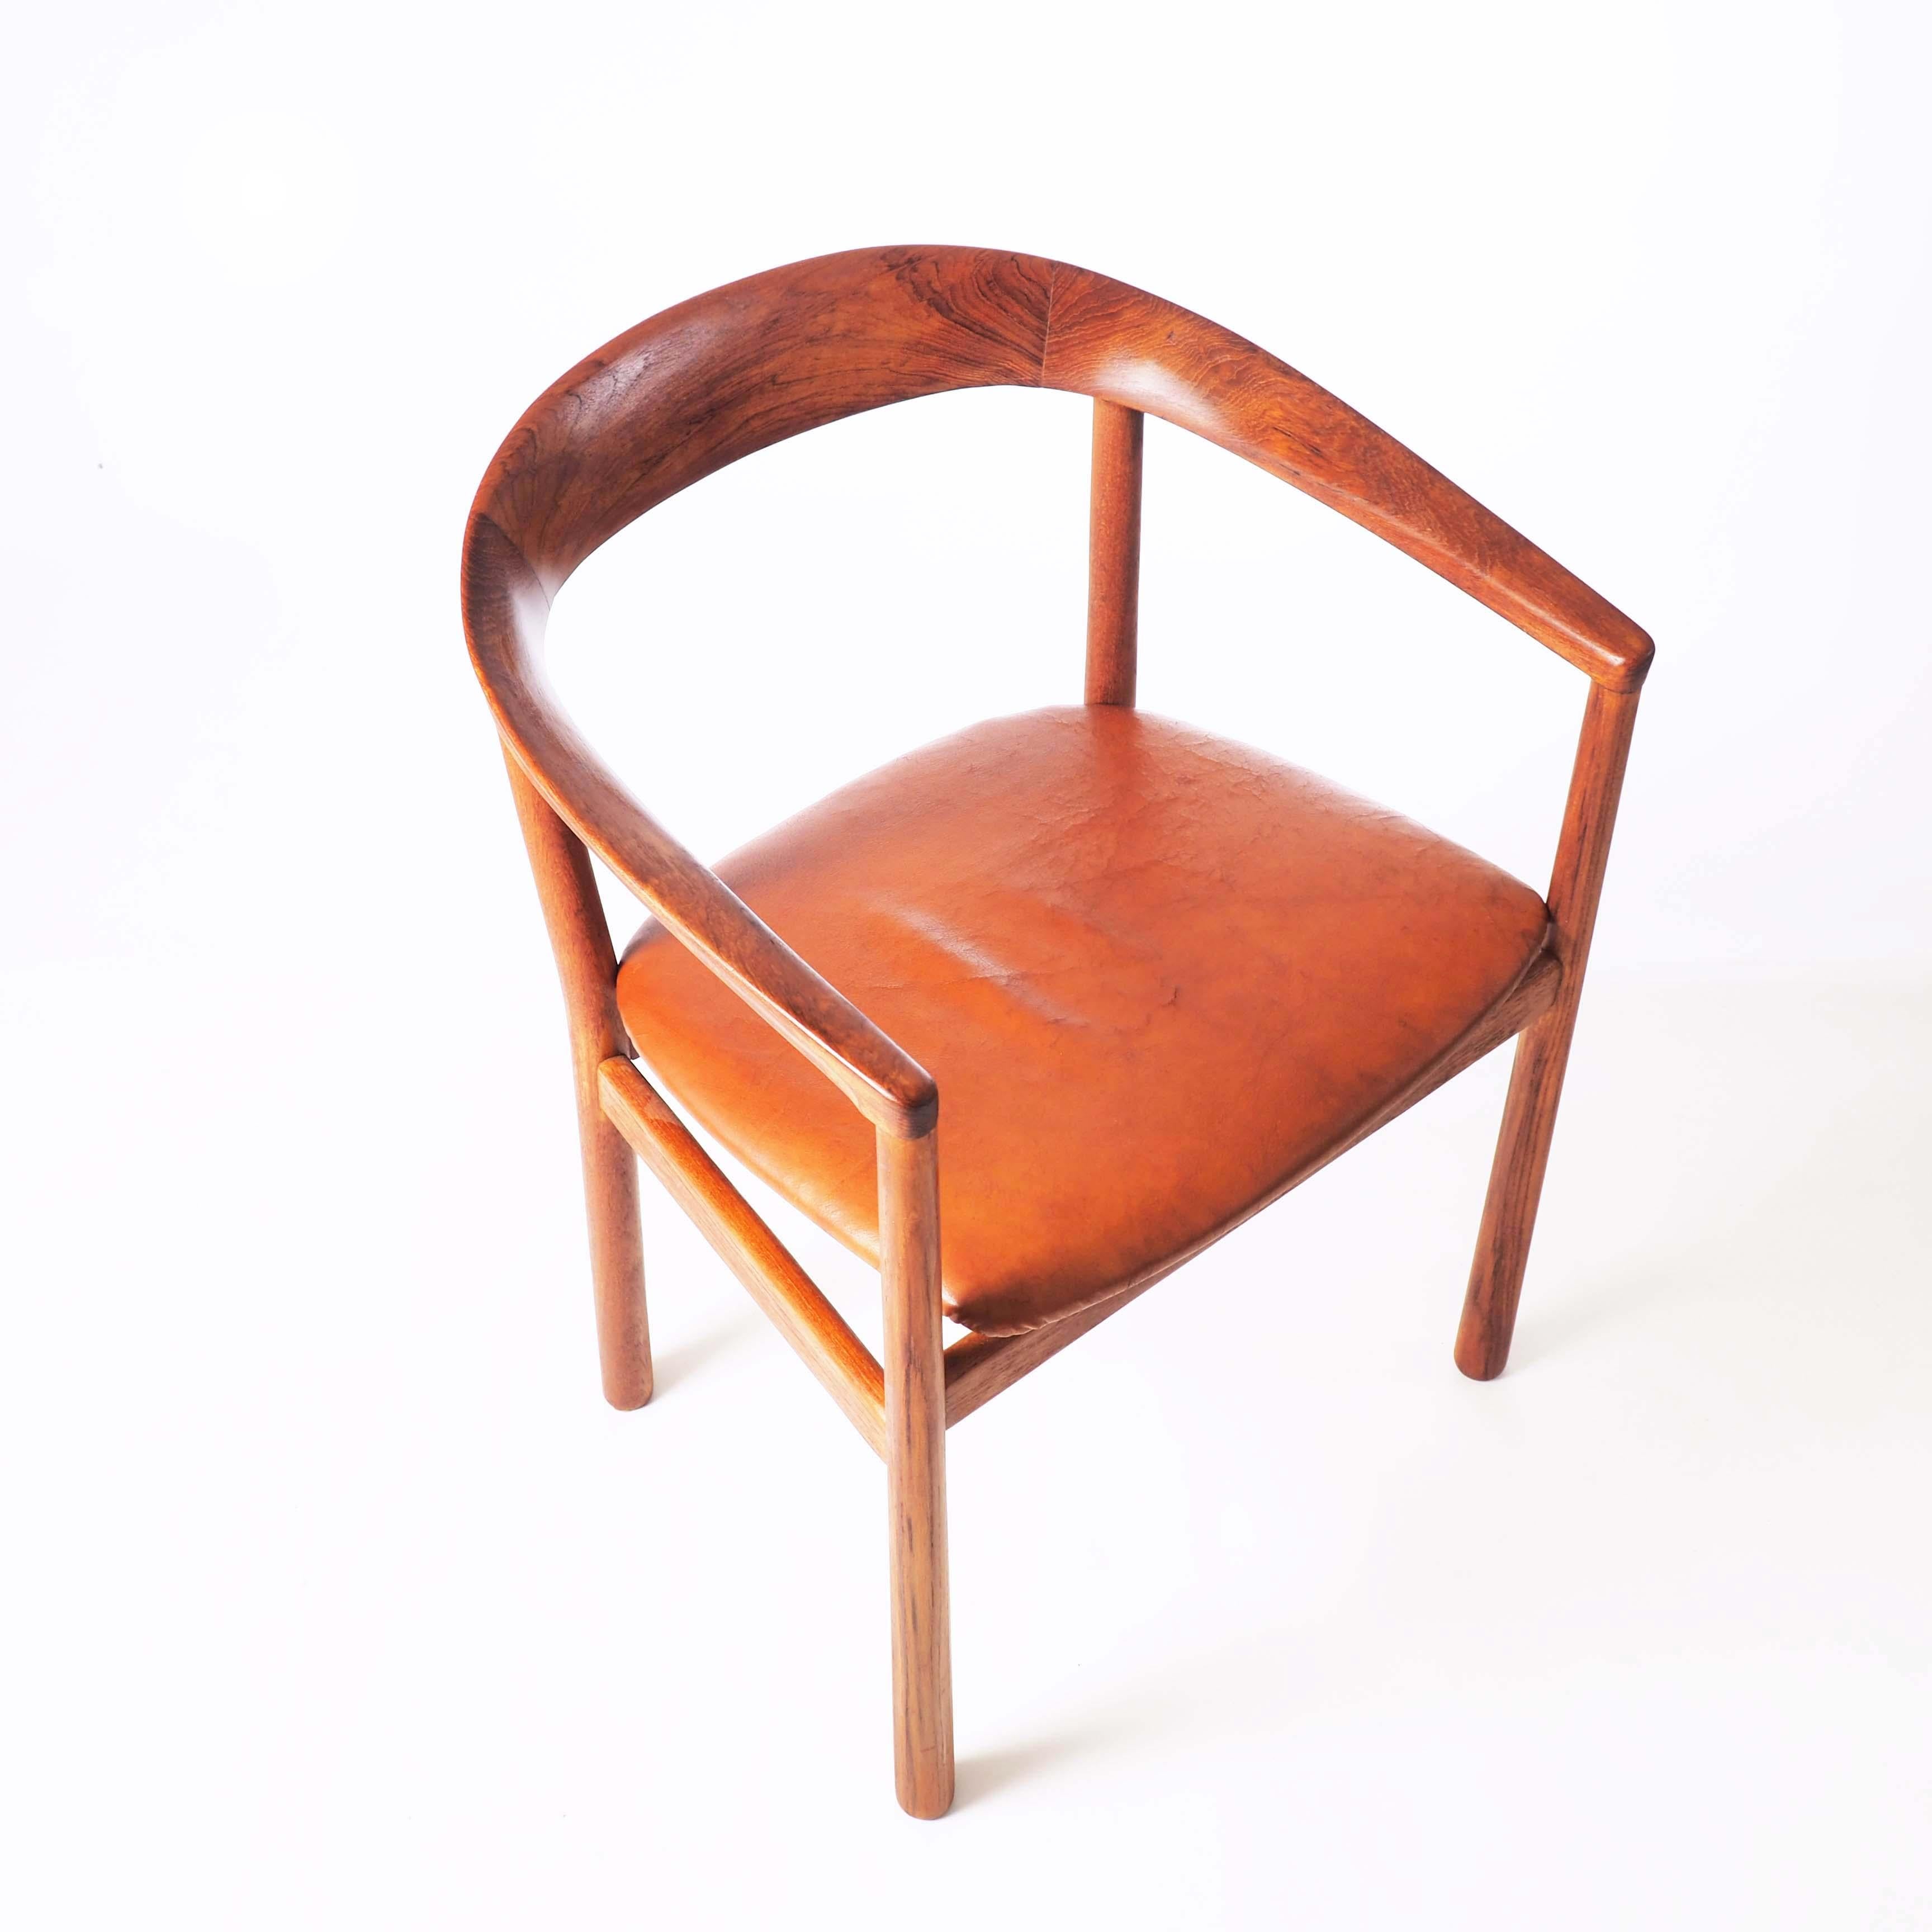 This stylish chair was designed by the Carl-Axel Acking for the Swedish Embassy in Tokyo in 1959. This piece is in solid teak and natural leather.